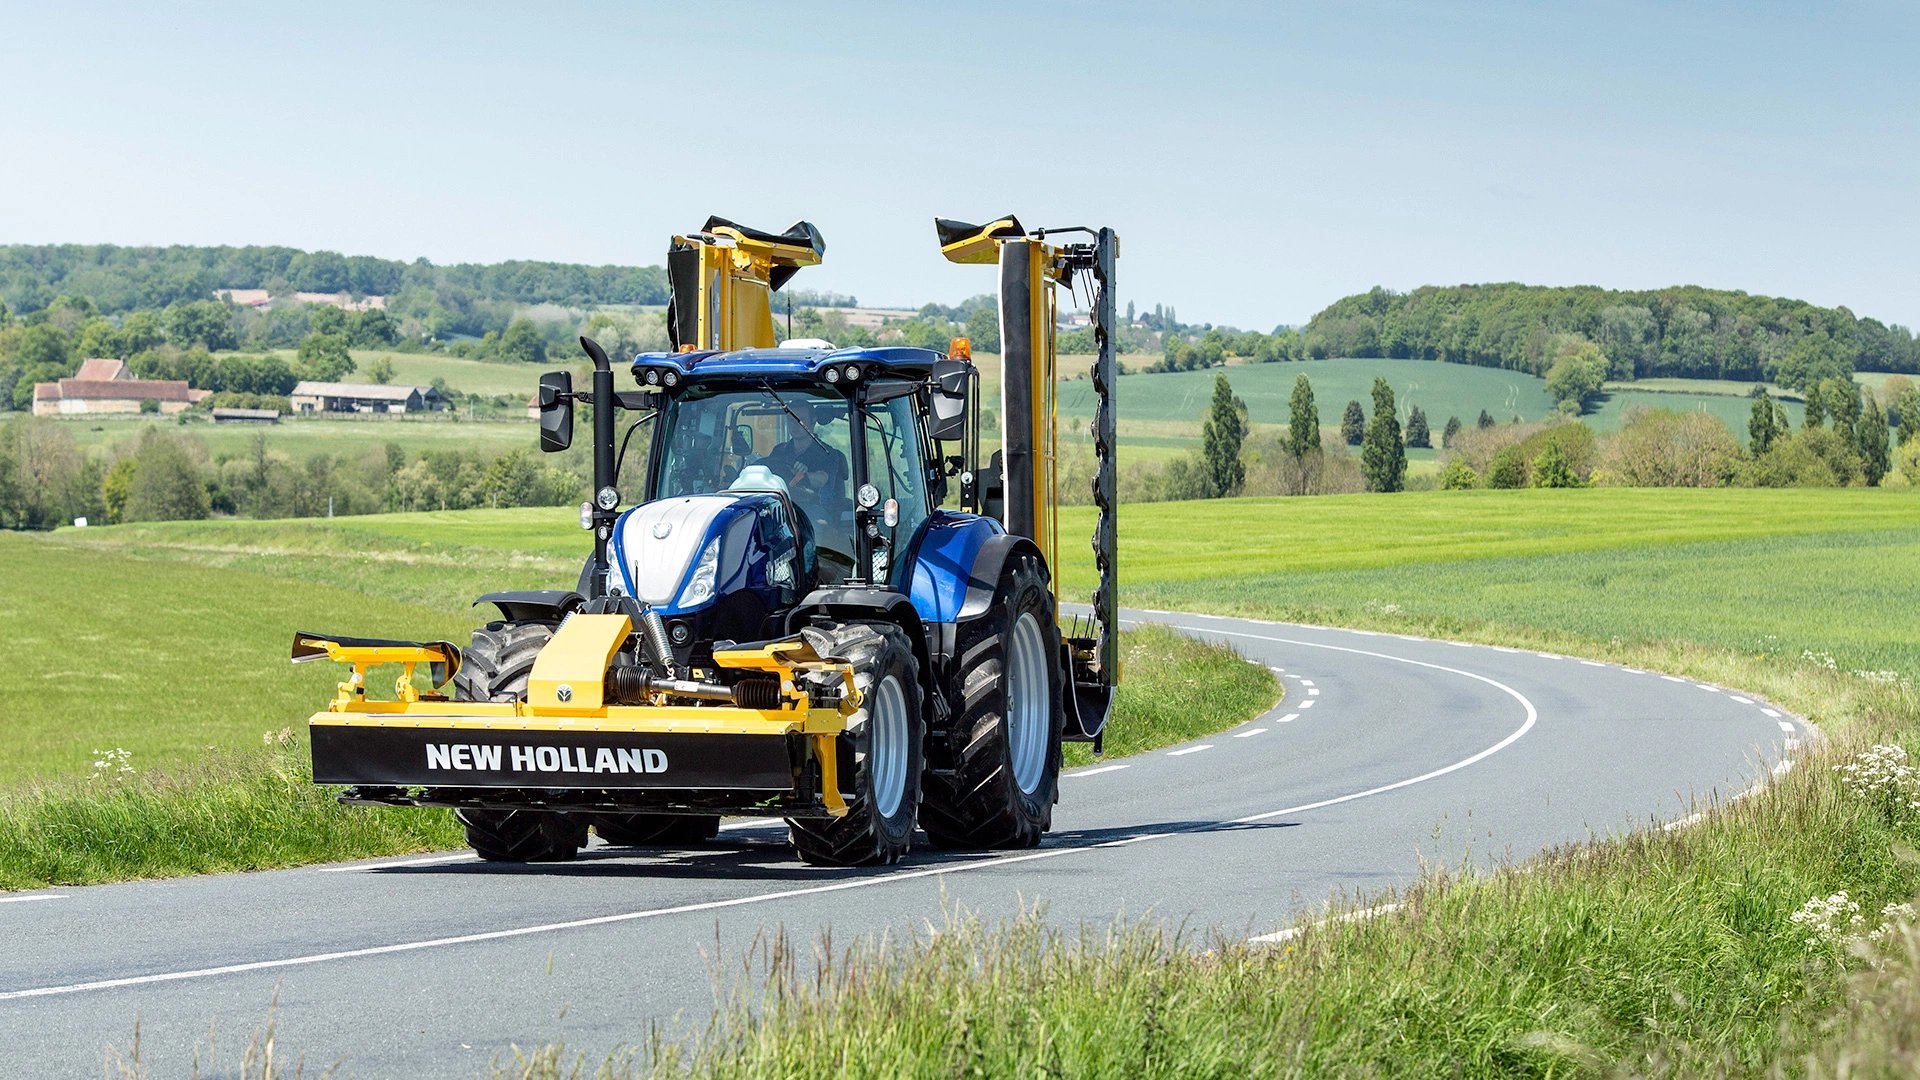 T7 SWB Tractor transporting mounted mowers on the road